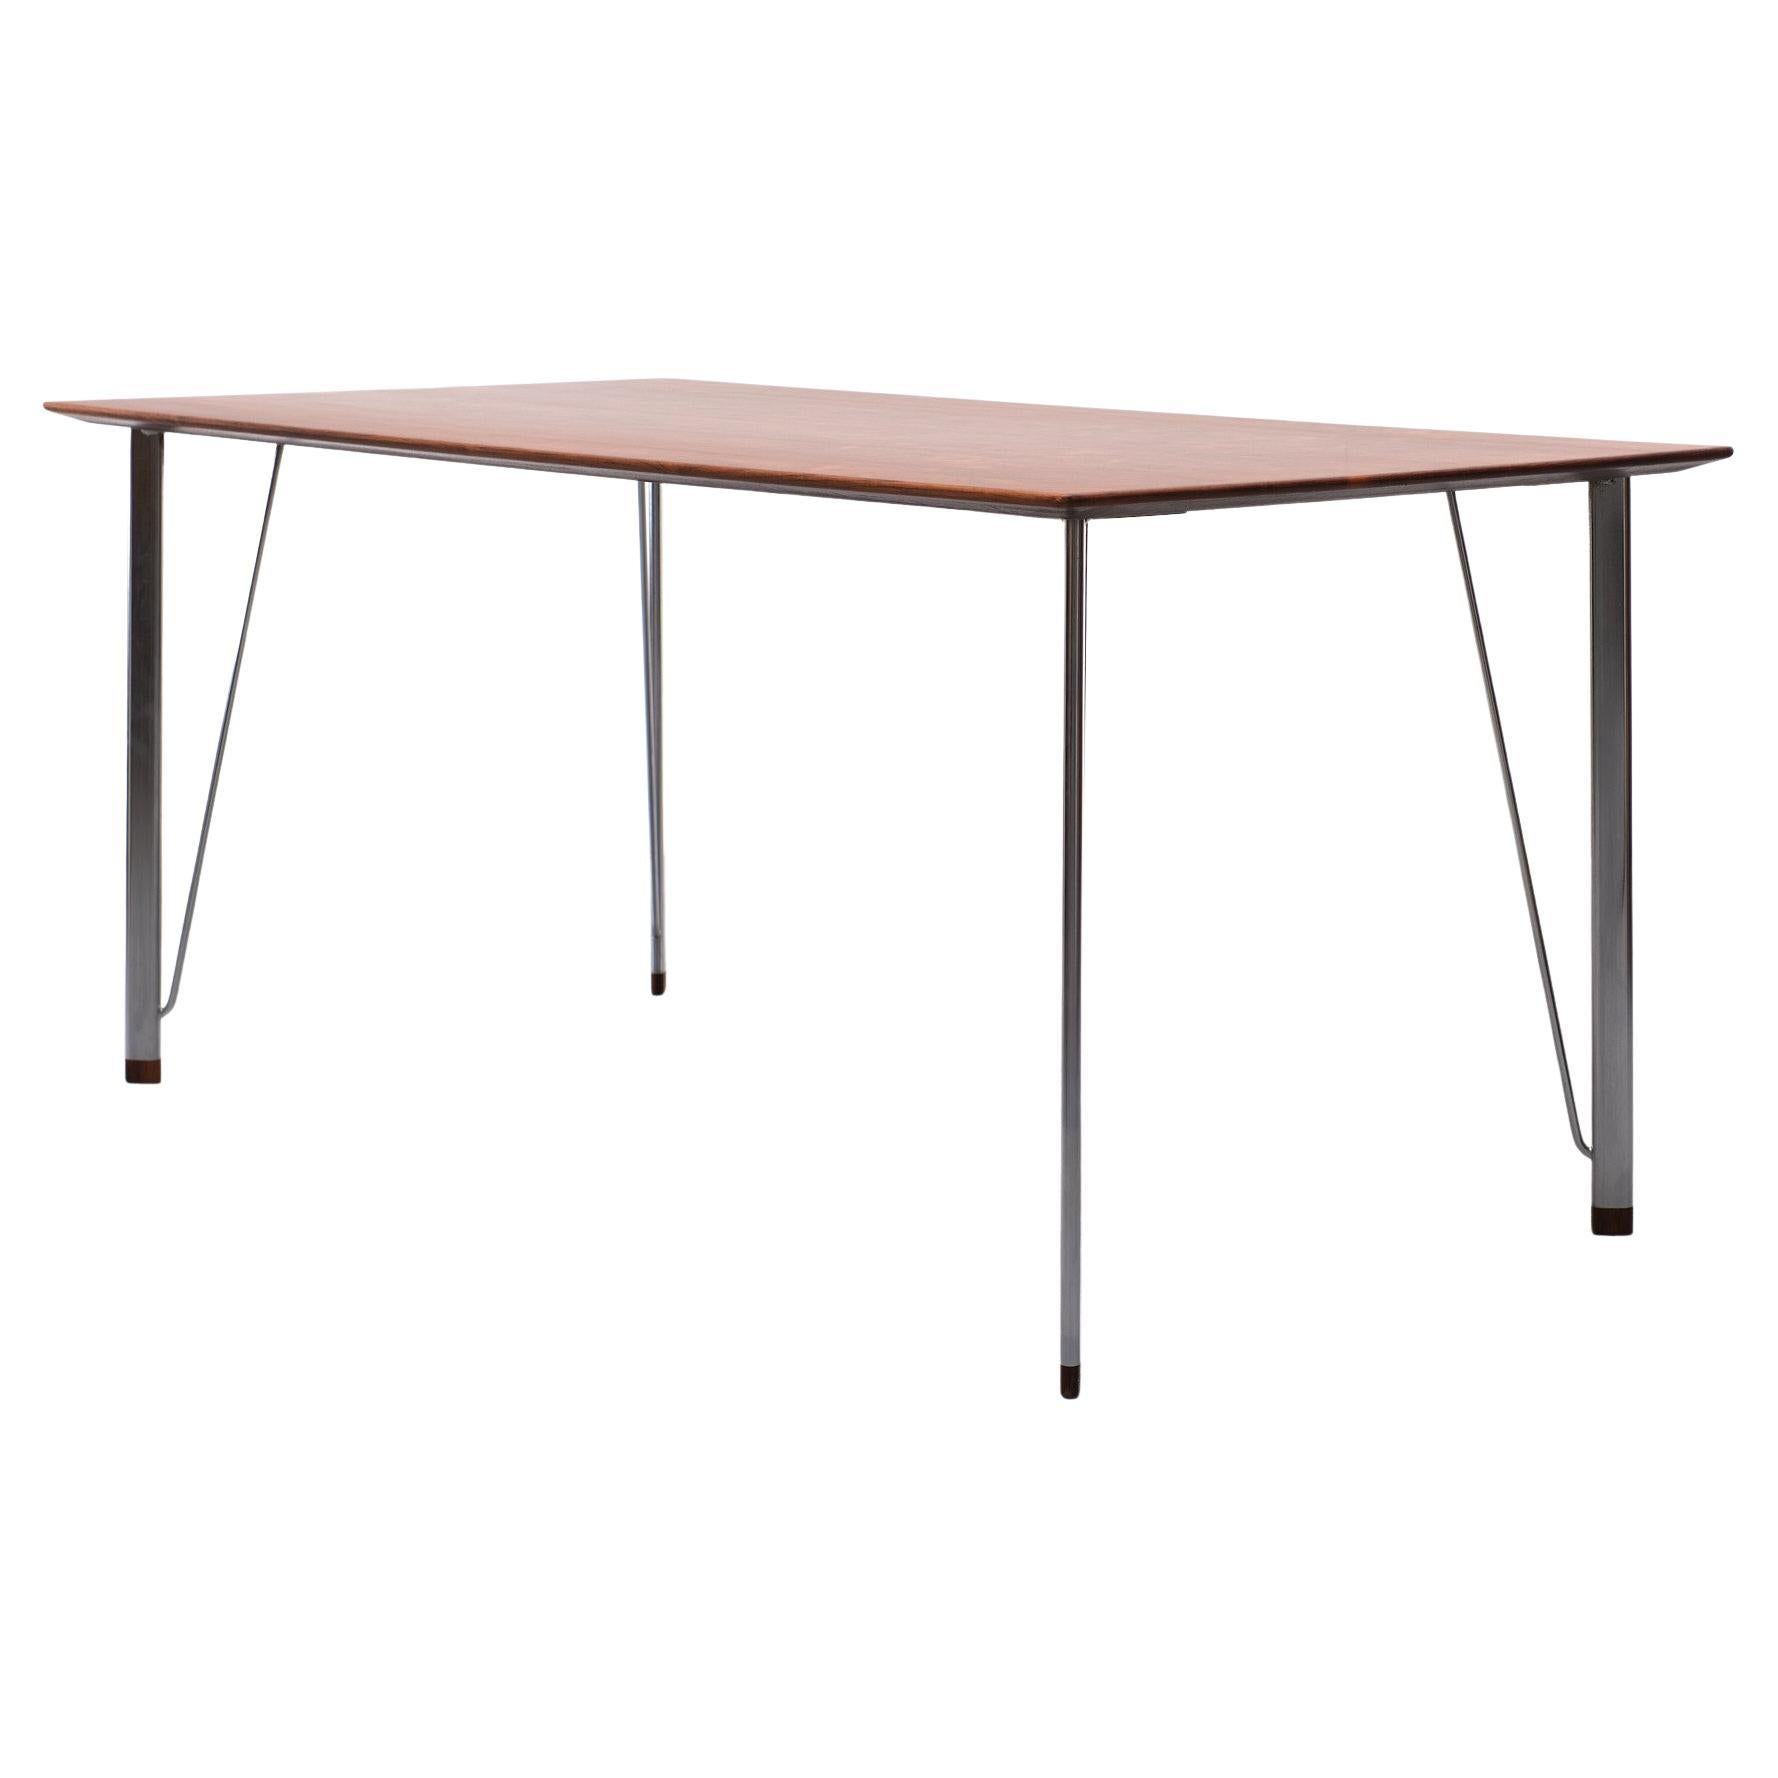 Beautiful  Rosewood working table .Model 3605  1950s  
Design by Arne Jacobsen for Fritz Hansen . Nice thin top
on elegant polished Metal legs . solid Rosewood feet . 